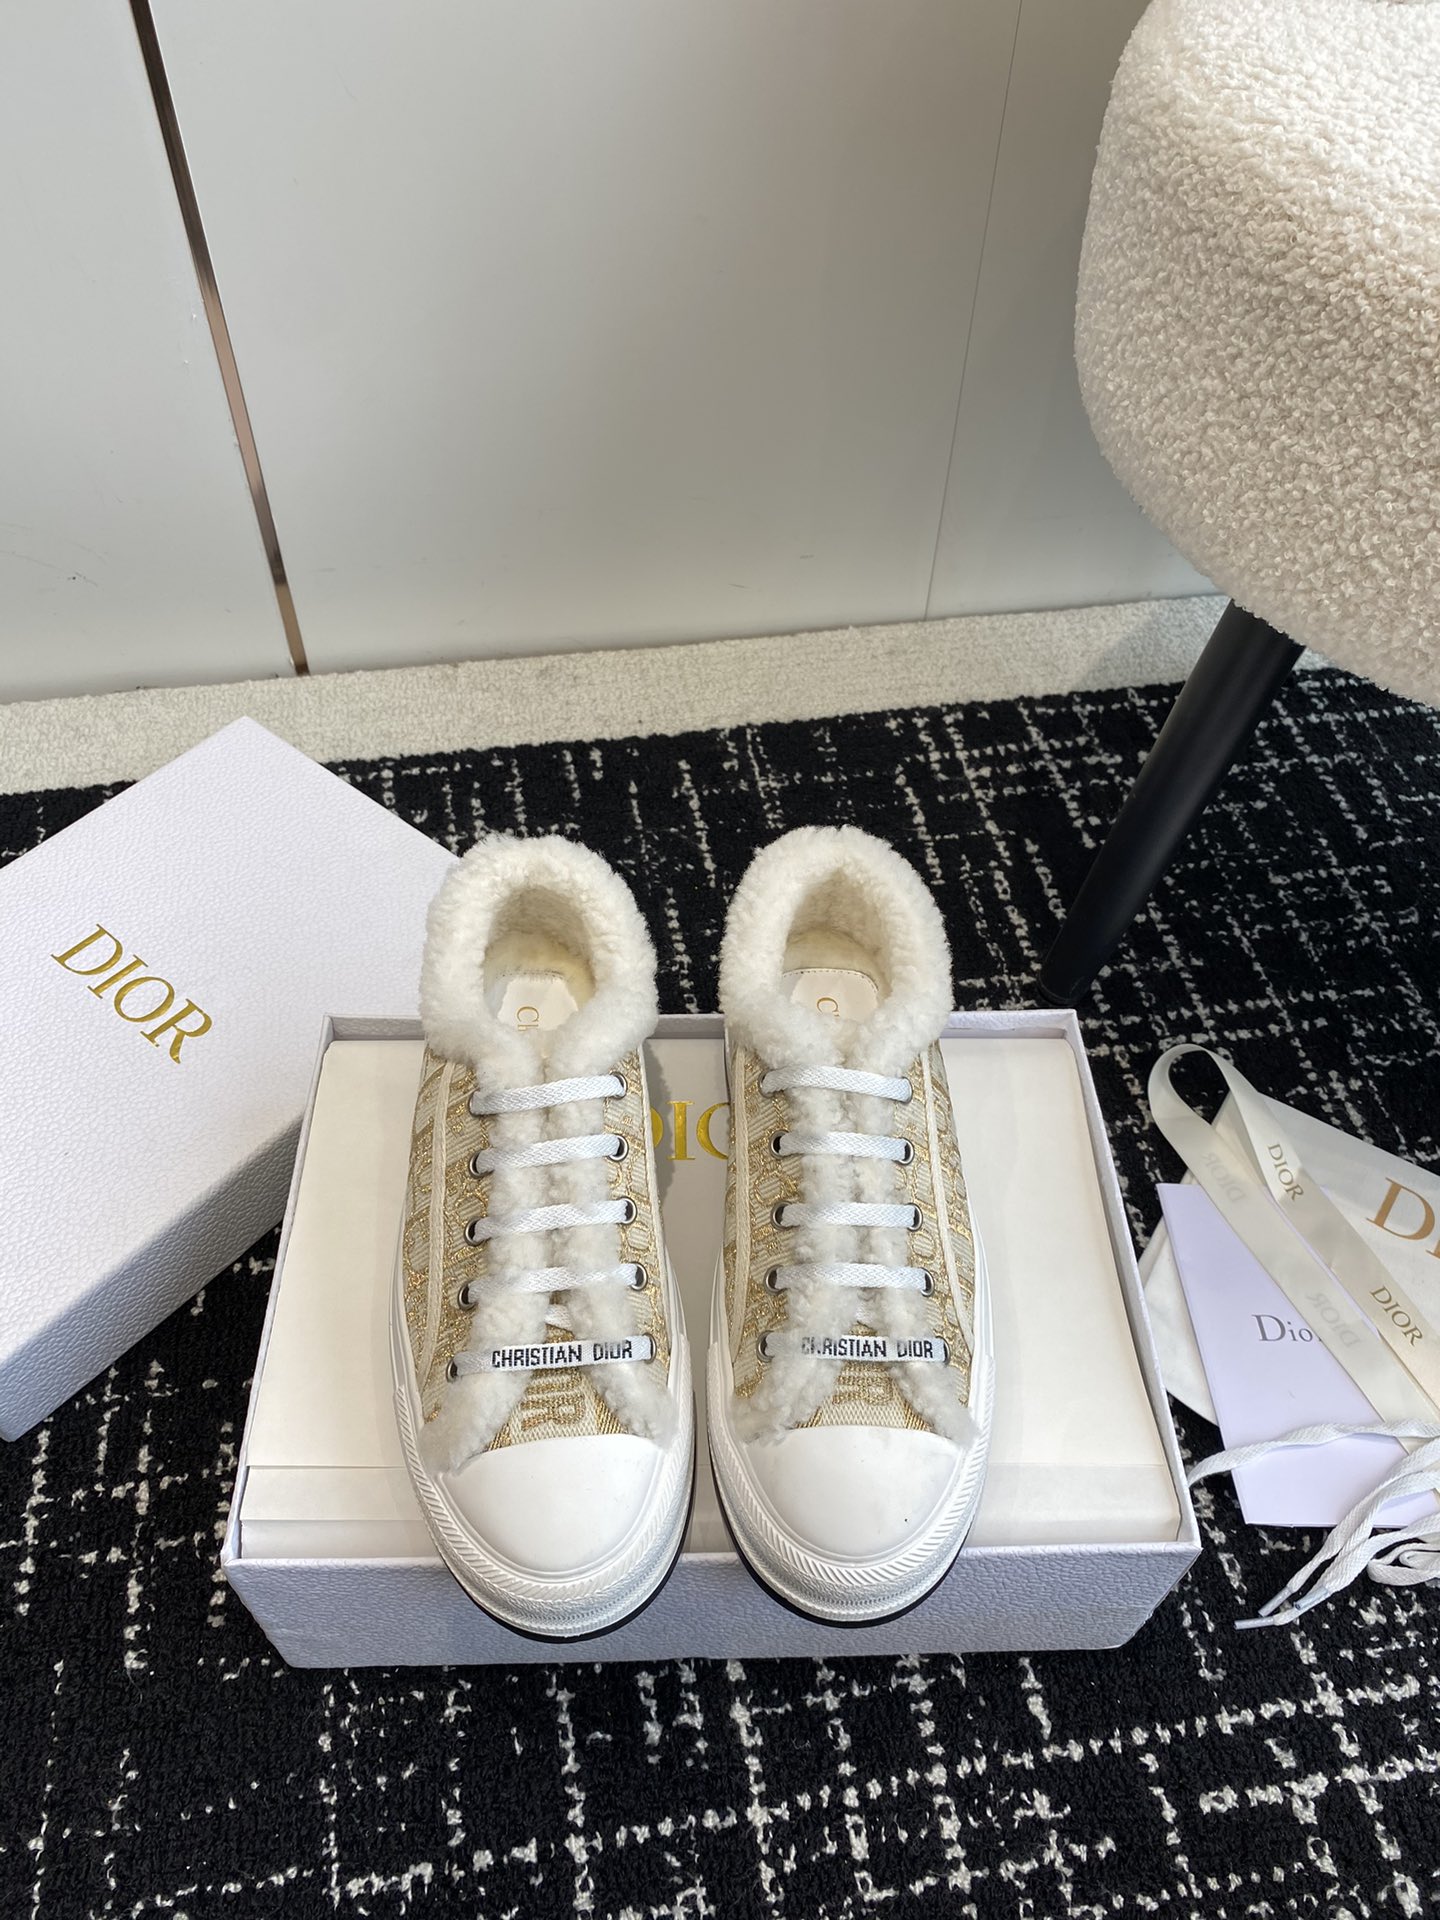 Dior Shoes Sneakers Wholesale China
 Embroidery Wool Spring Collection Sweatpants